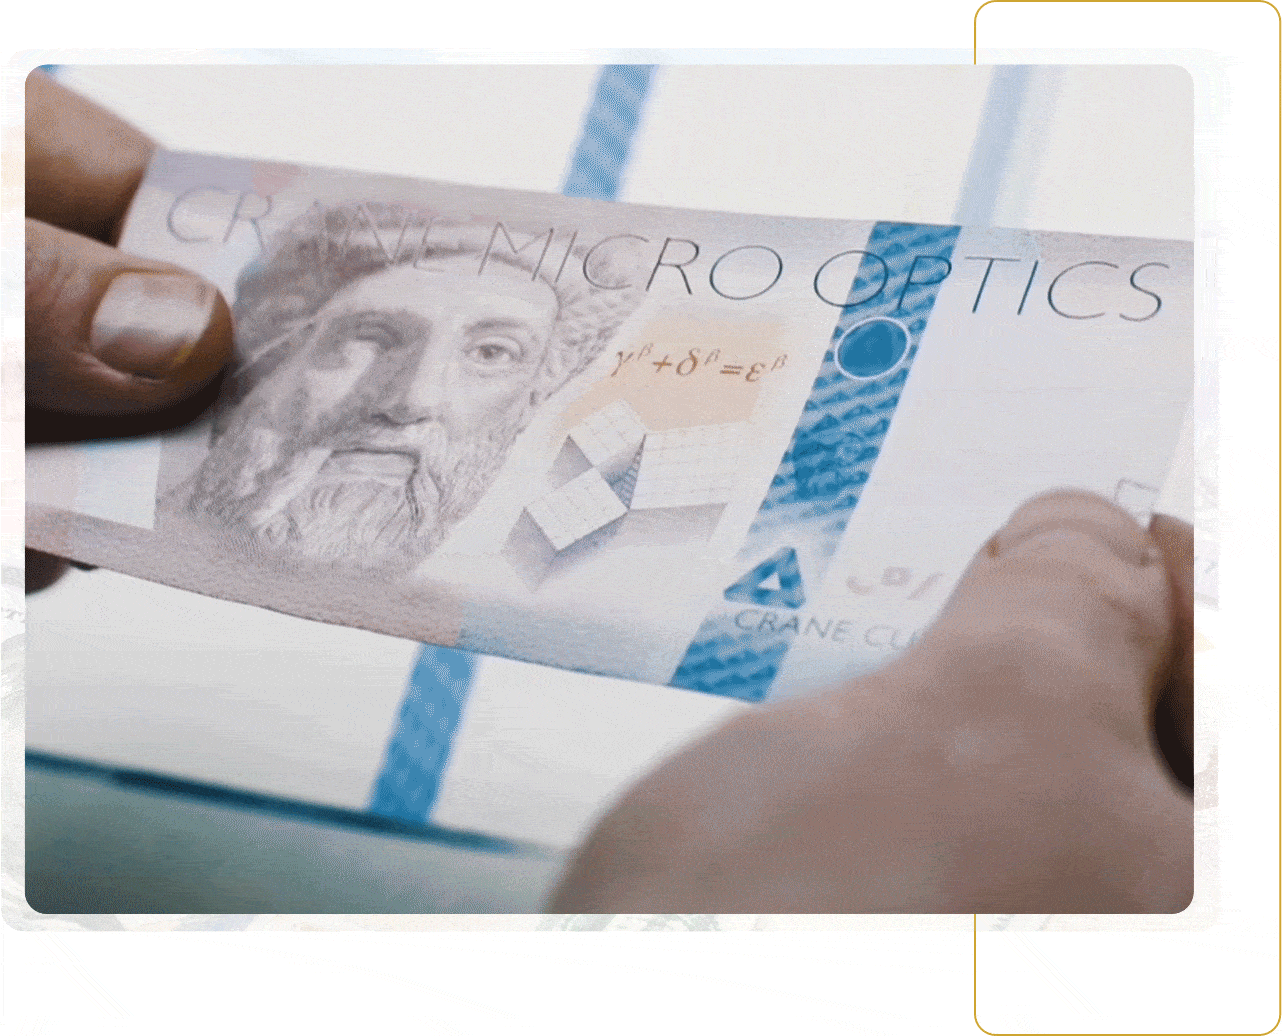 Animated gif of hologram showing up on moving paper bill